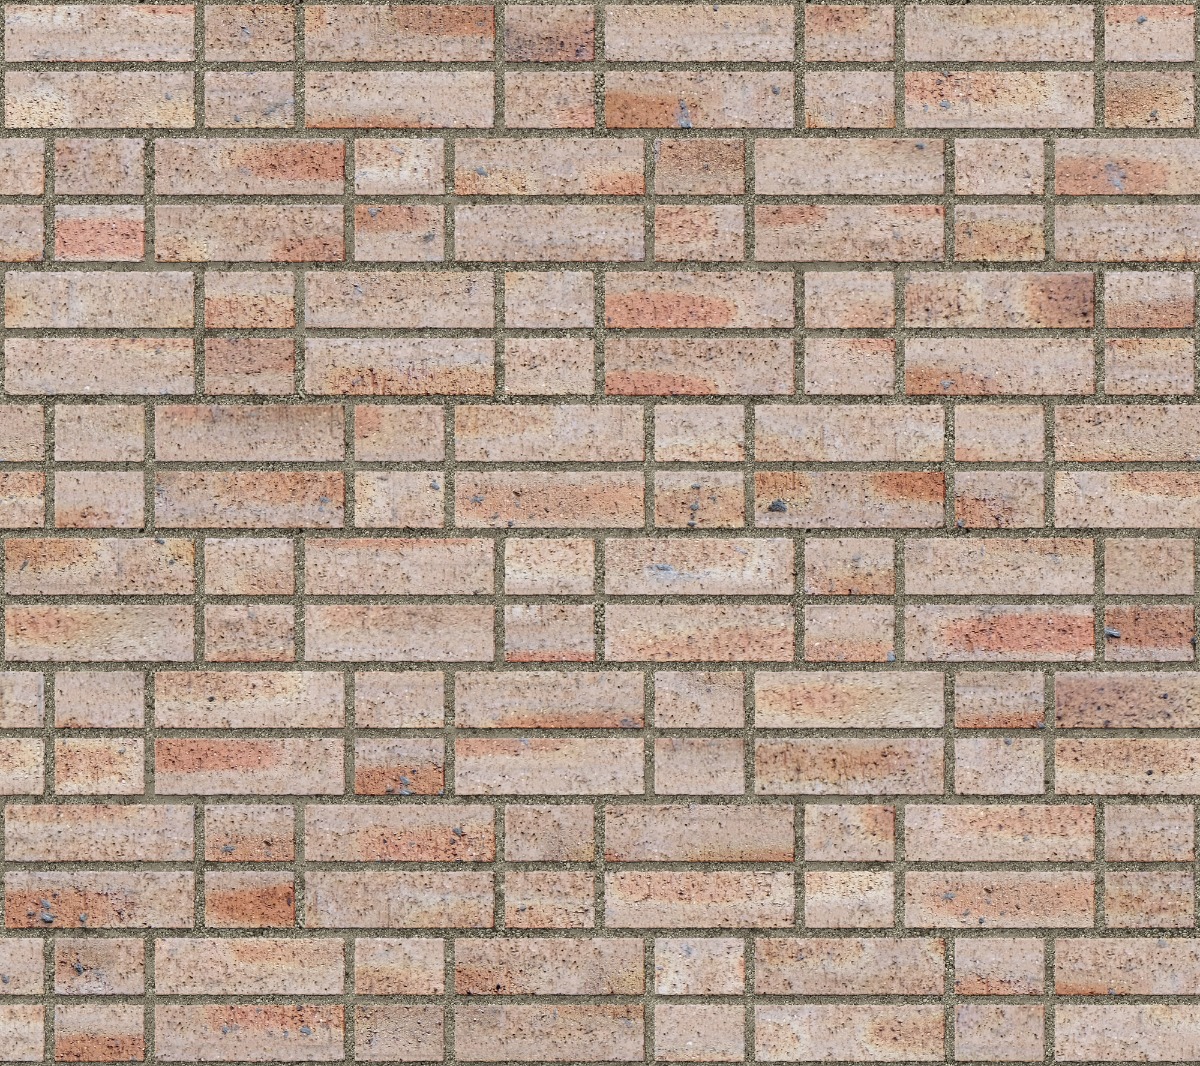 A seamless brick texture with dragfaced brick units arranged in a Double Flemish pattern